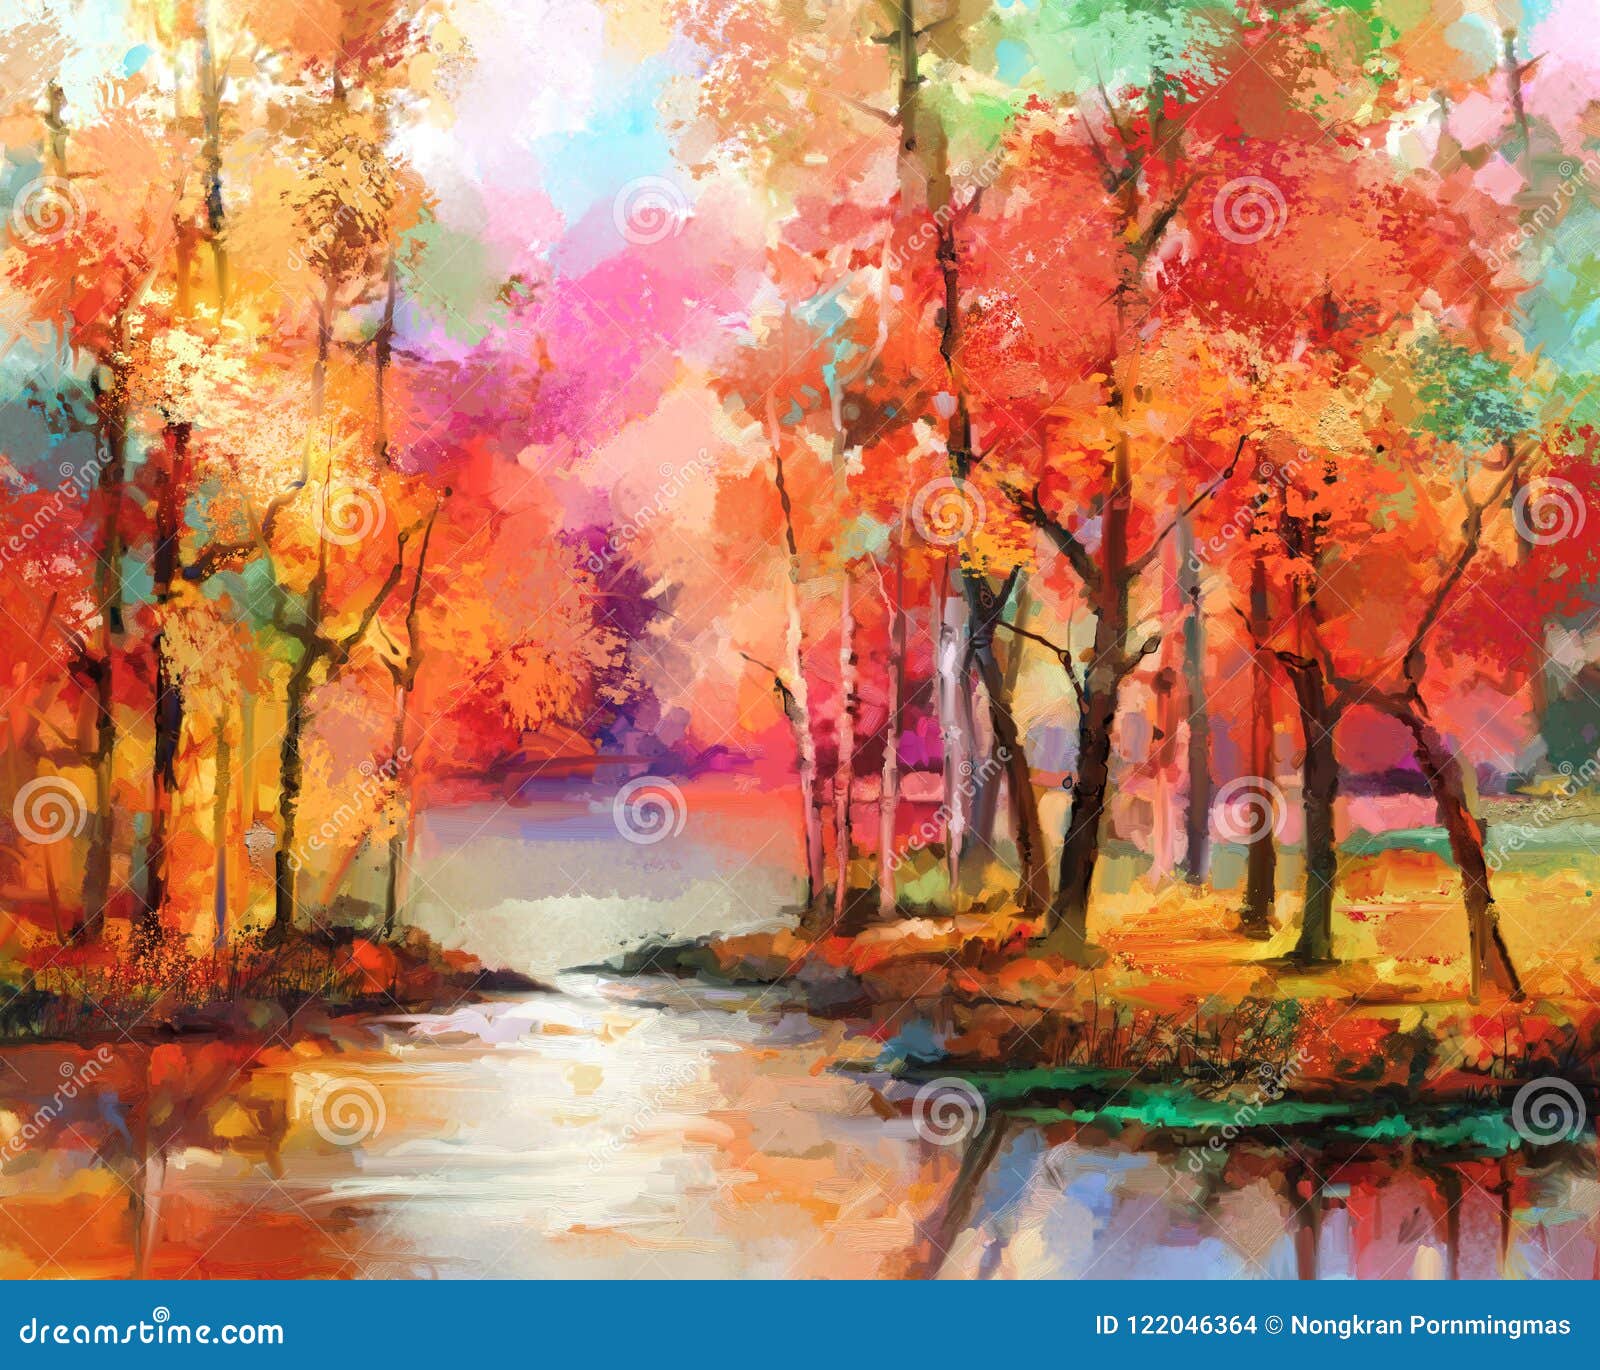 autumn, fall season nature background. hand painted impressionist, outdoor landscape